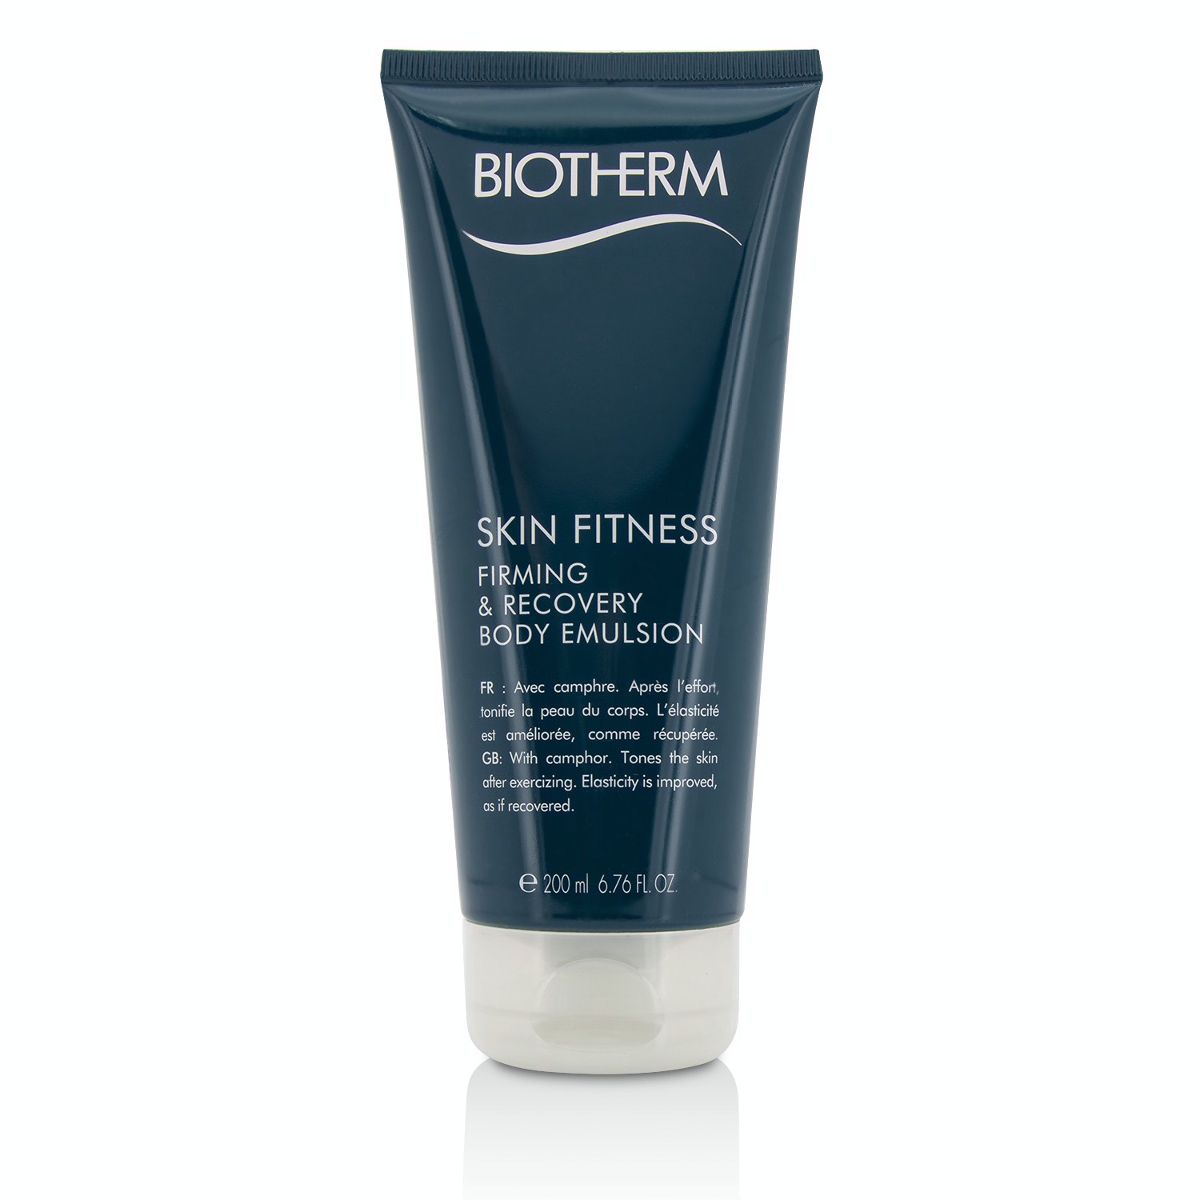 Skin Fitness Firming  Recovery Body Emulsion Biotherm Image